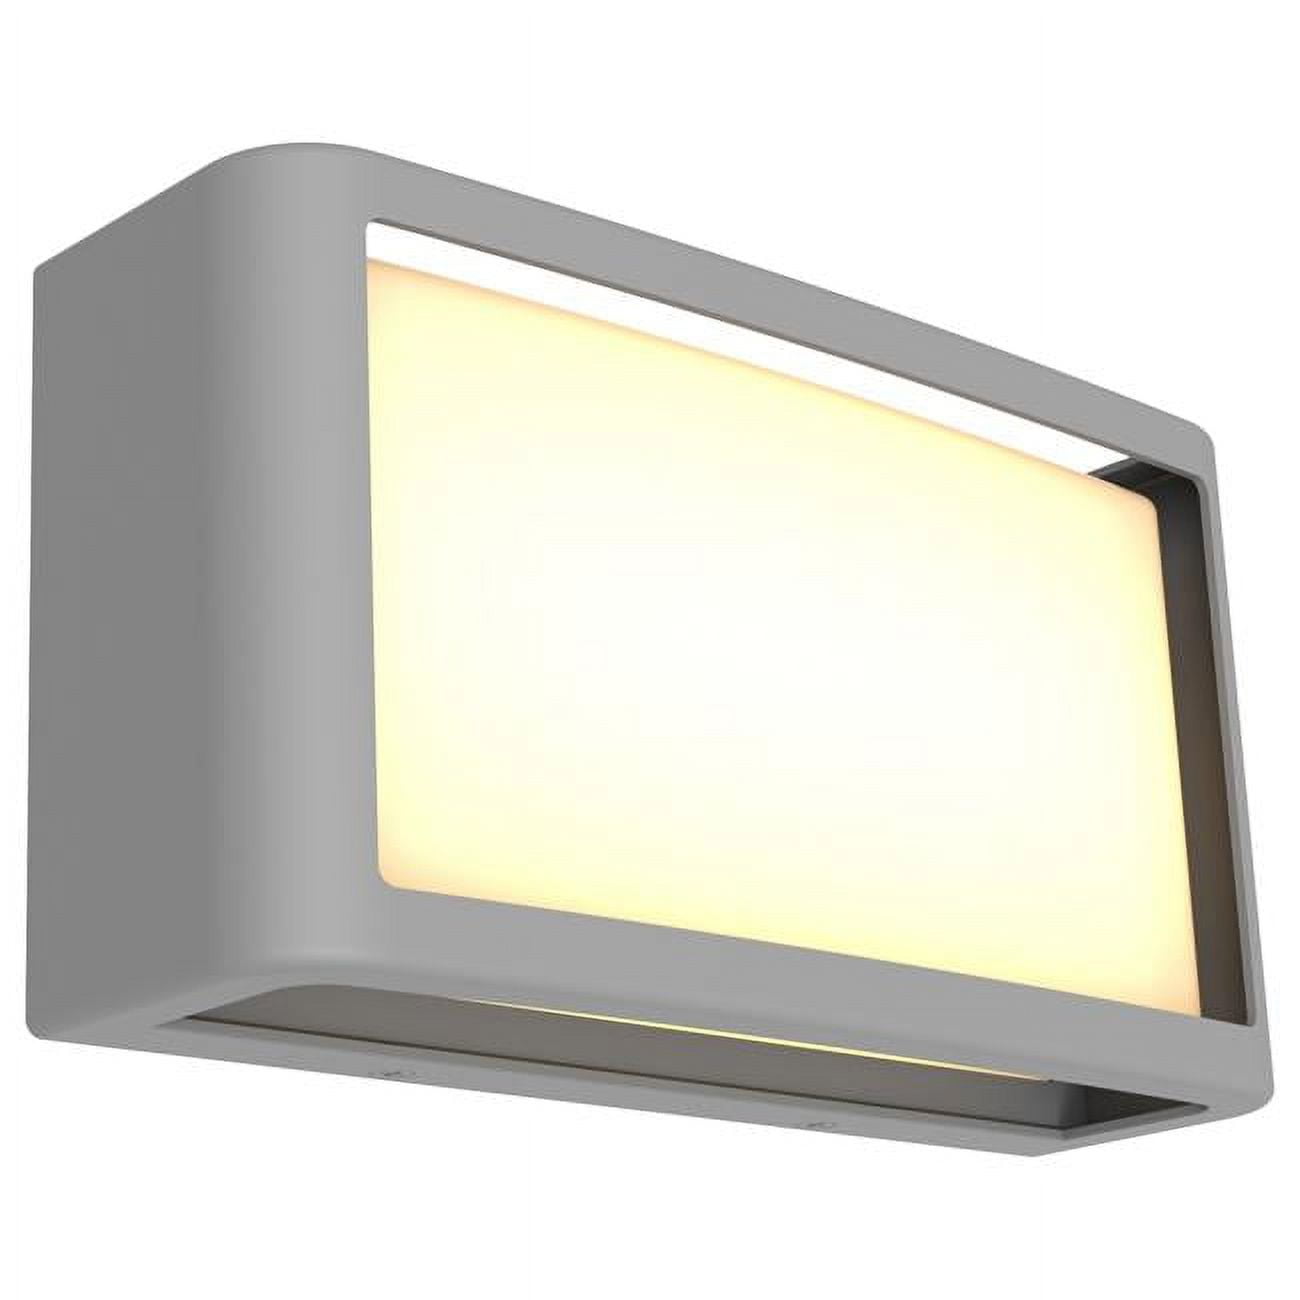 Picture of Access Lighting 20023LEDDMG-SAT-ACR 9 in. Malibu Outdoor LED Light Wall Mount, Satin